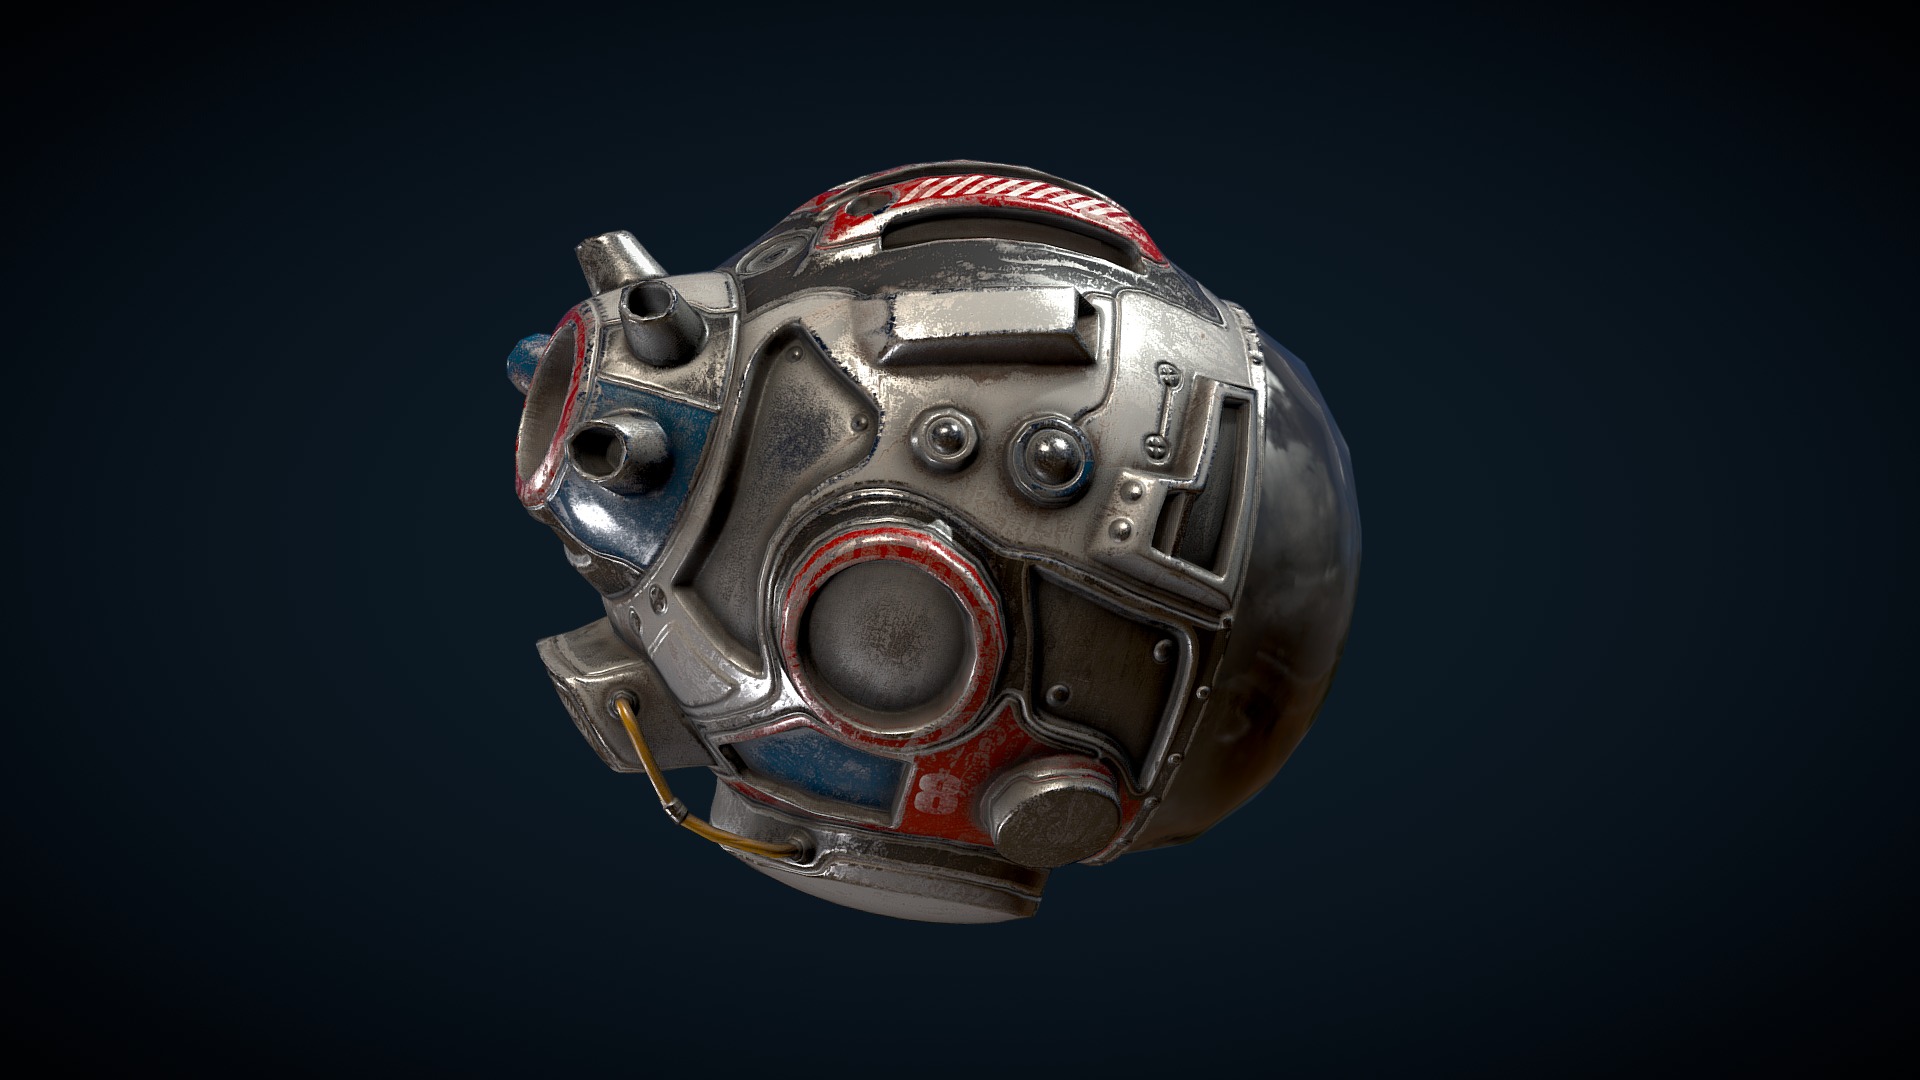 3D model Little Submarine - This is a 3D model of the Little Submarine. The 3D model is about a metal helmet with a red and black design.